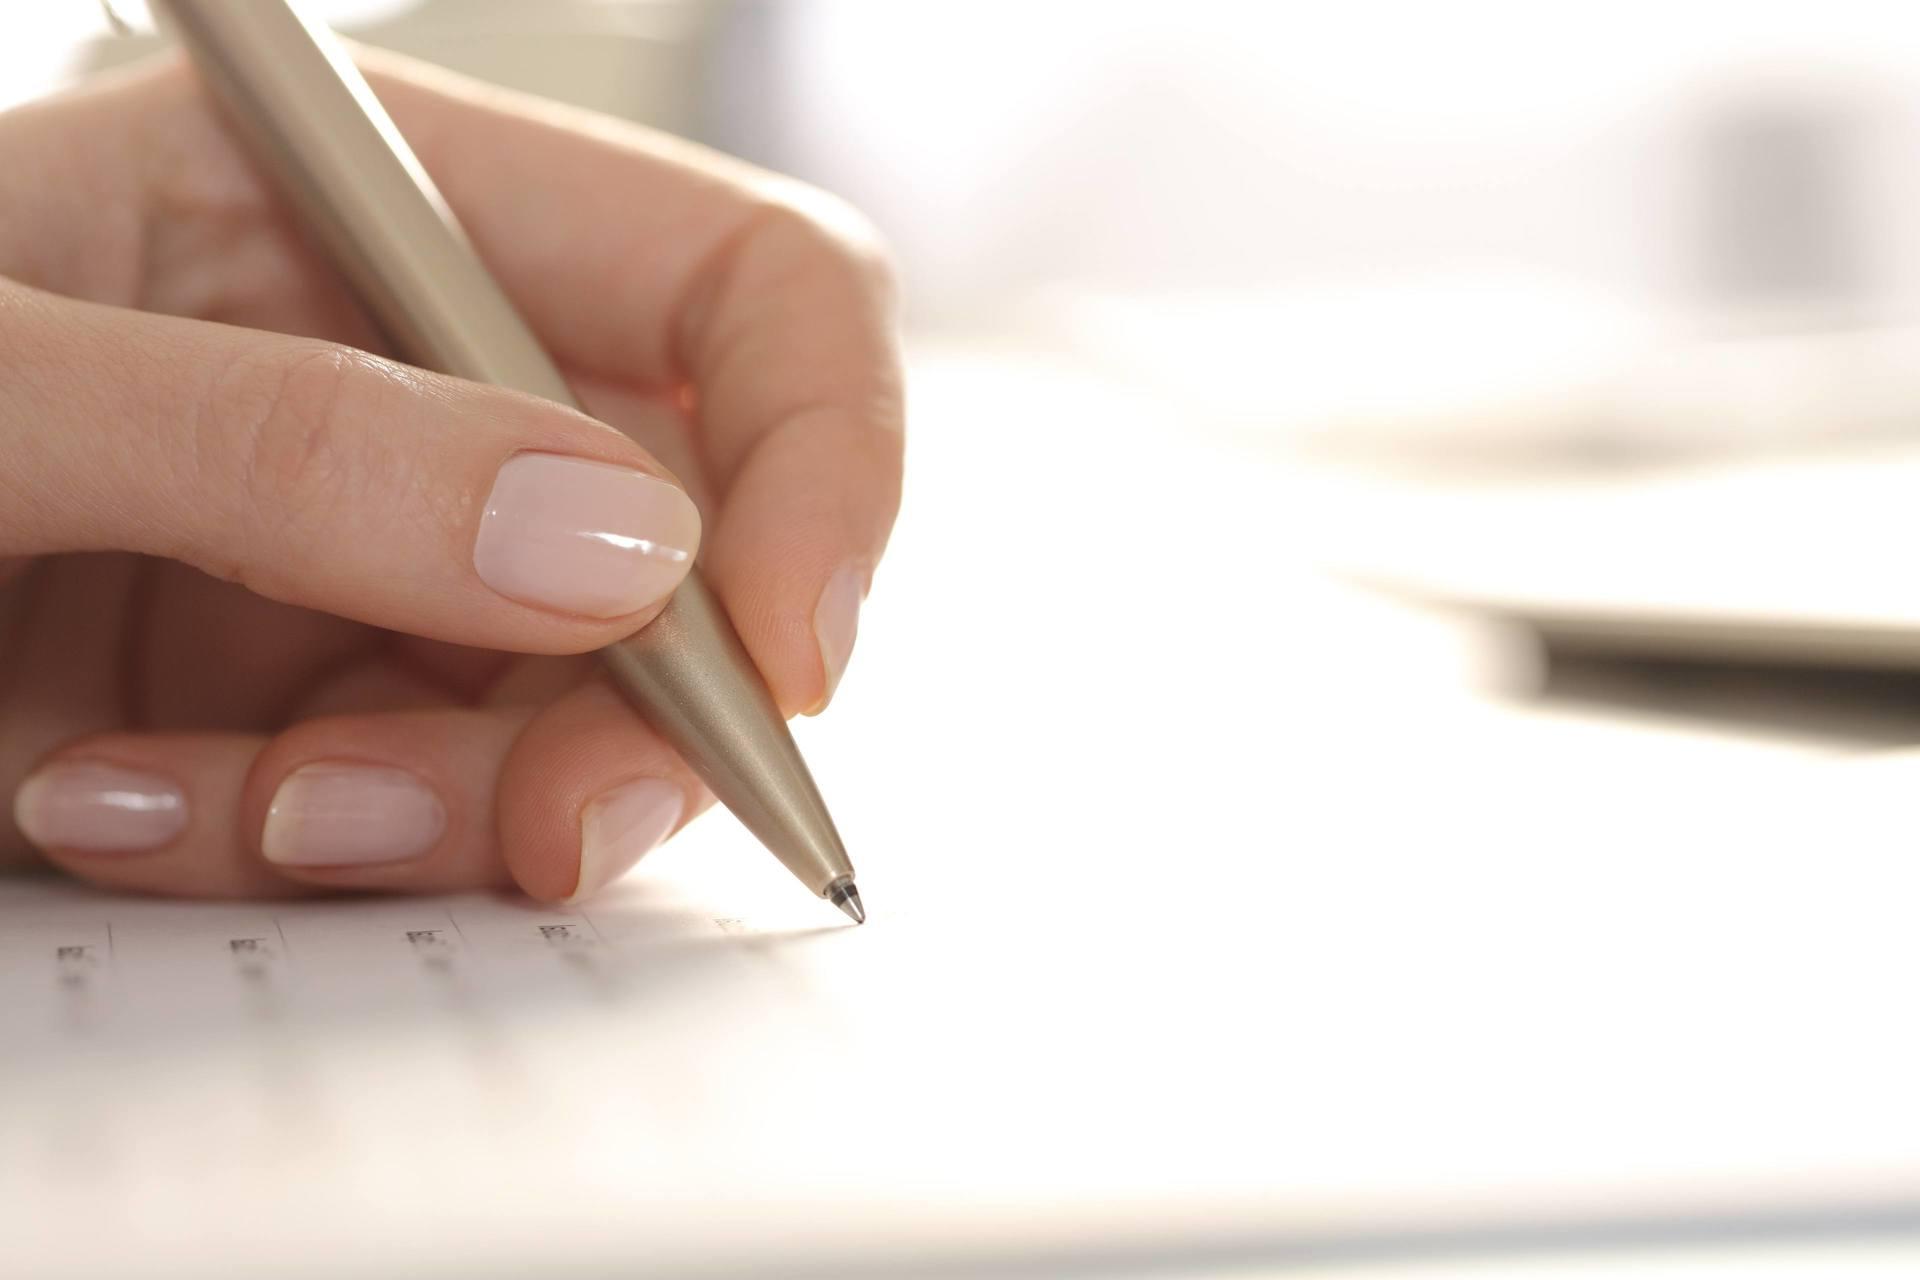 Woman hand filling out form with pen on a desk